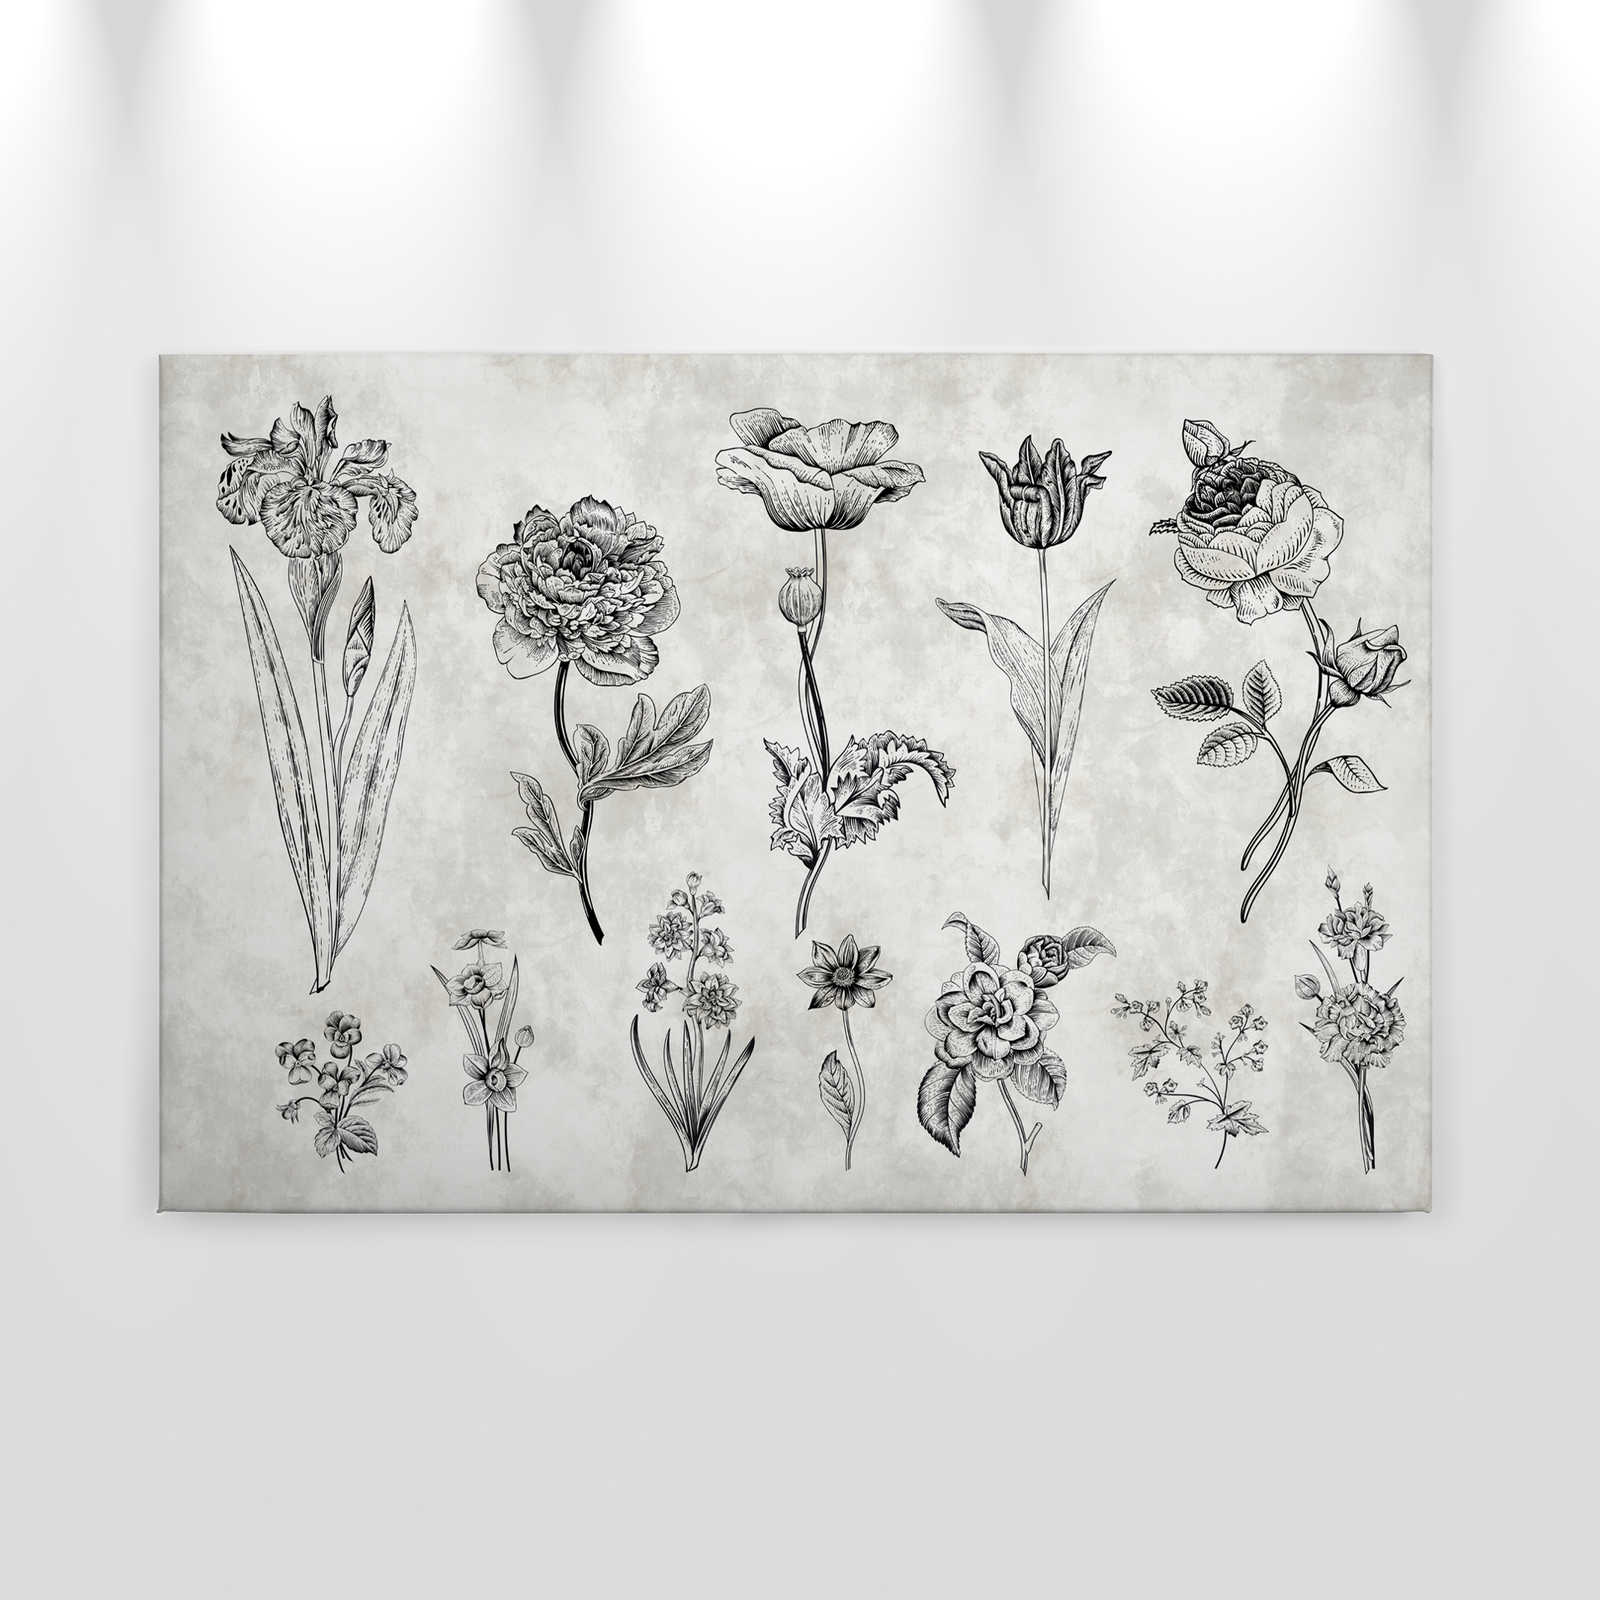             Canvas painting Flowers in drawing style - 0,90 m x 0,60 m
        